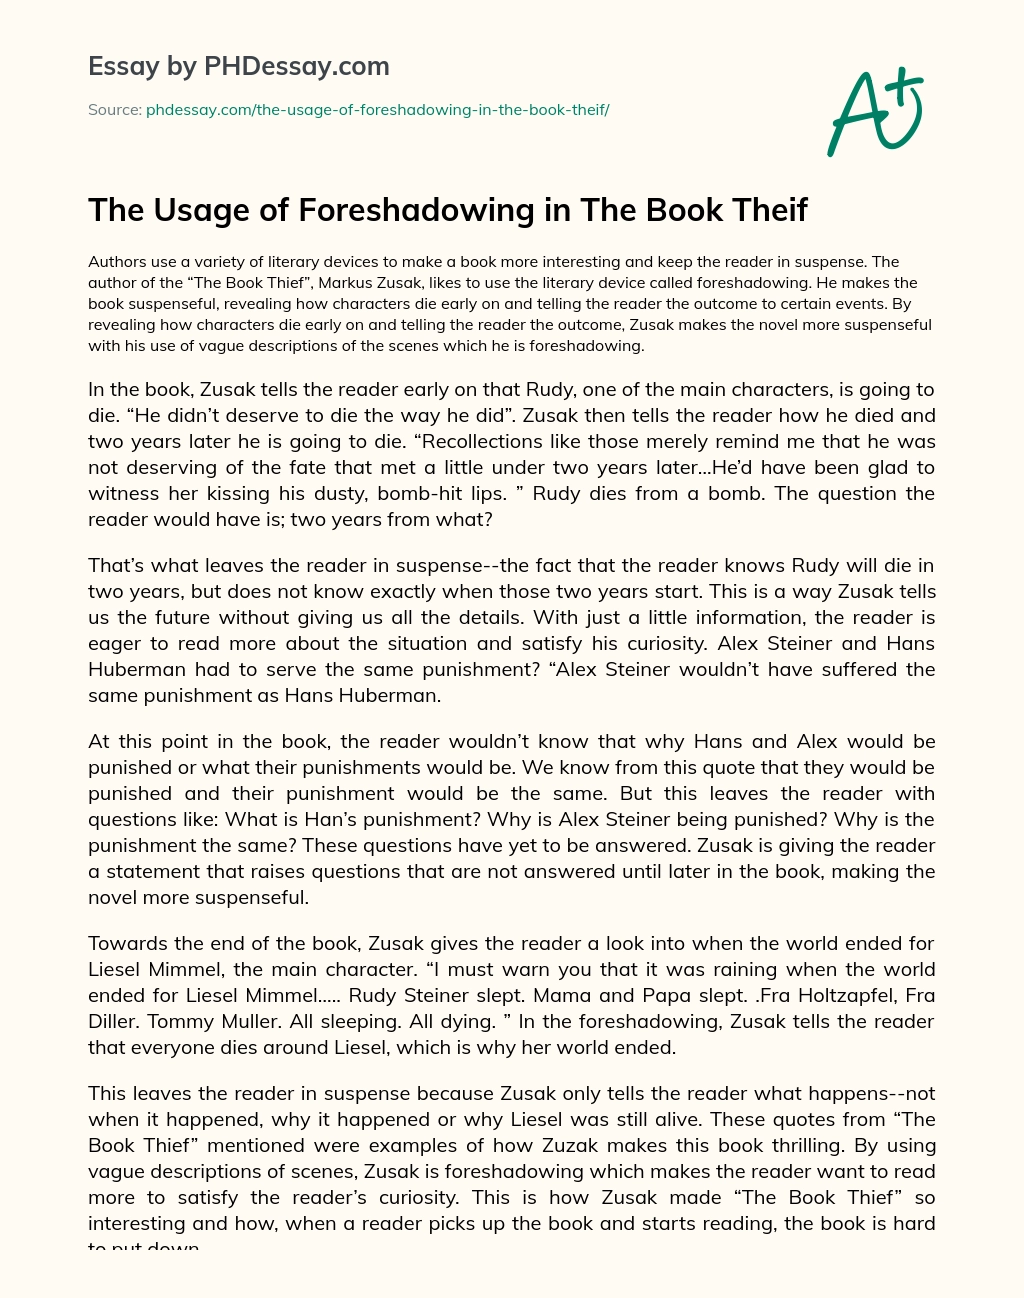 The Usage of Foreshadowing in The Book Theif essay